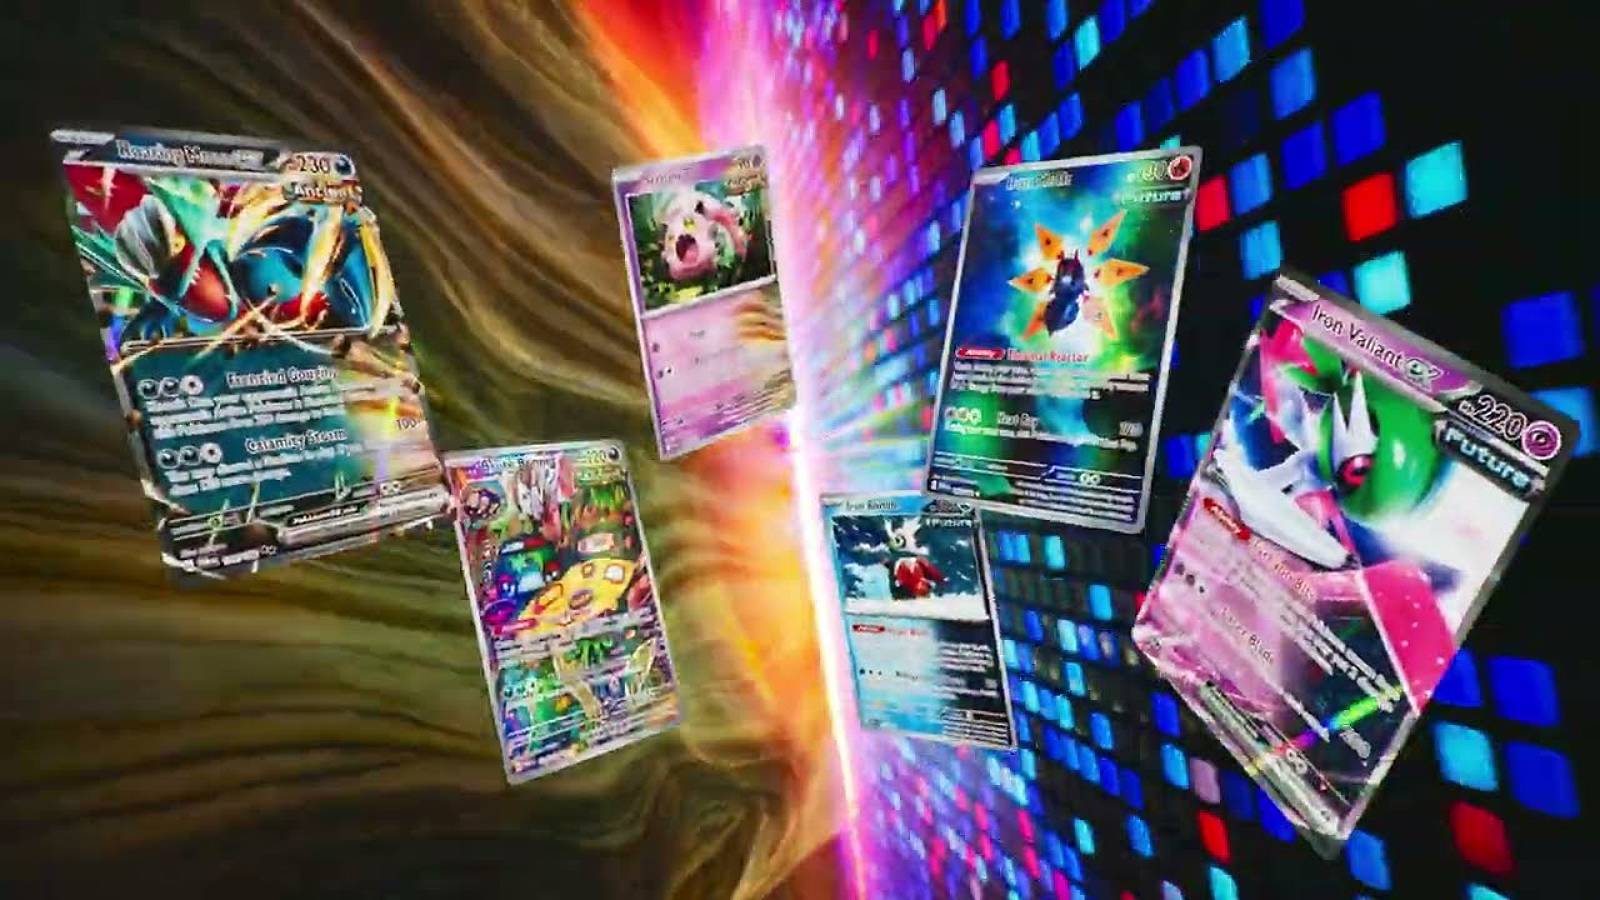 Promotional material shows several Pokemon TCG Paradox Rift cards